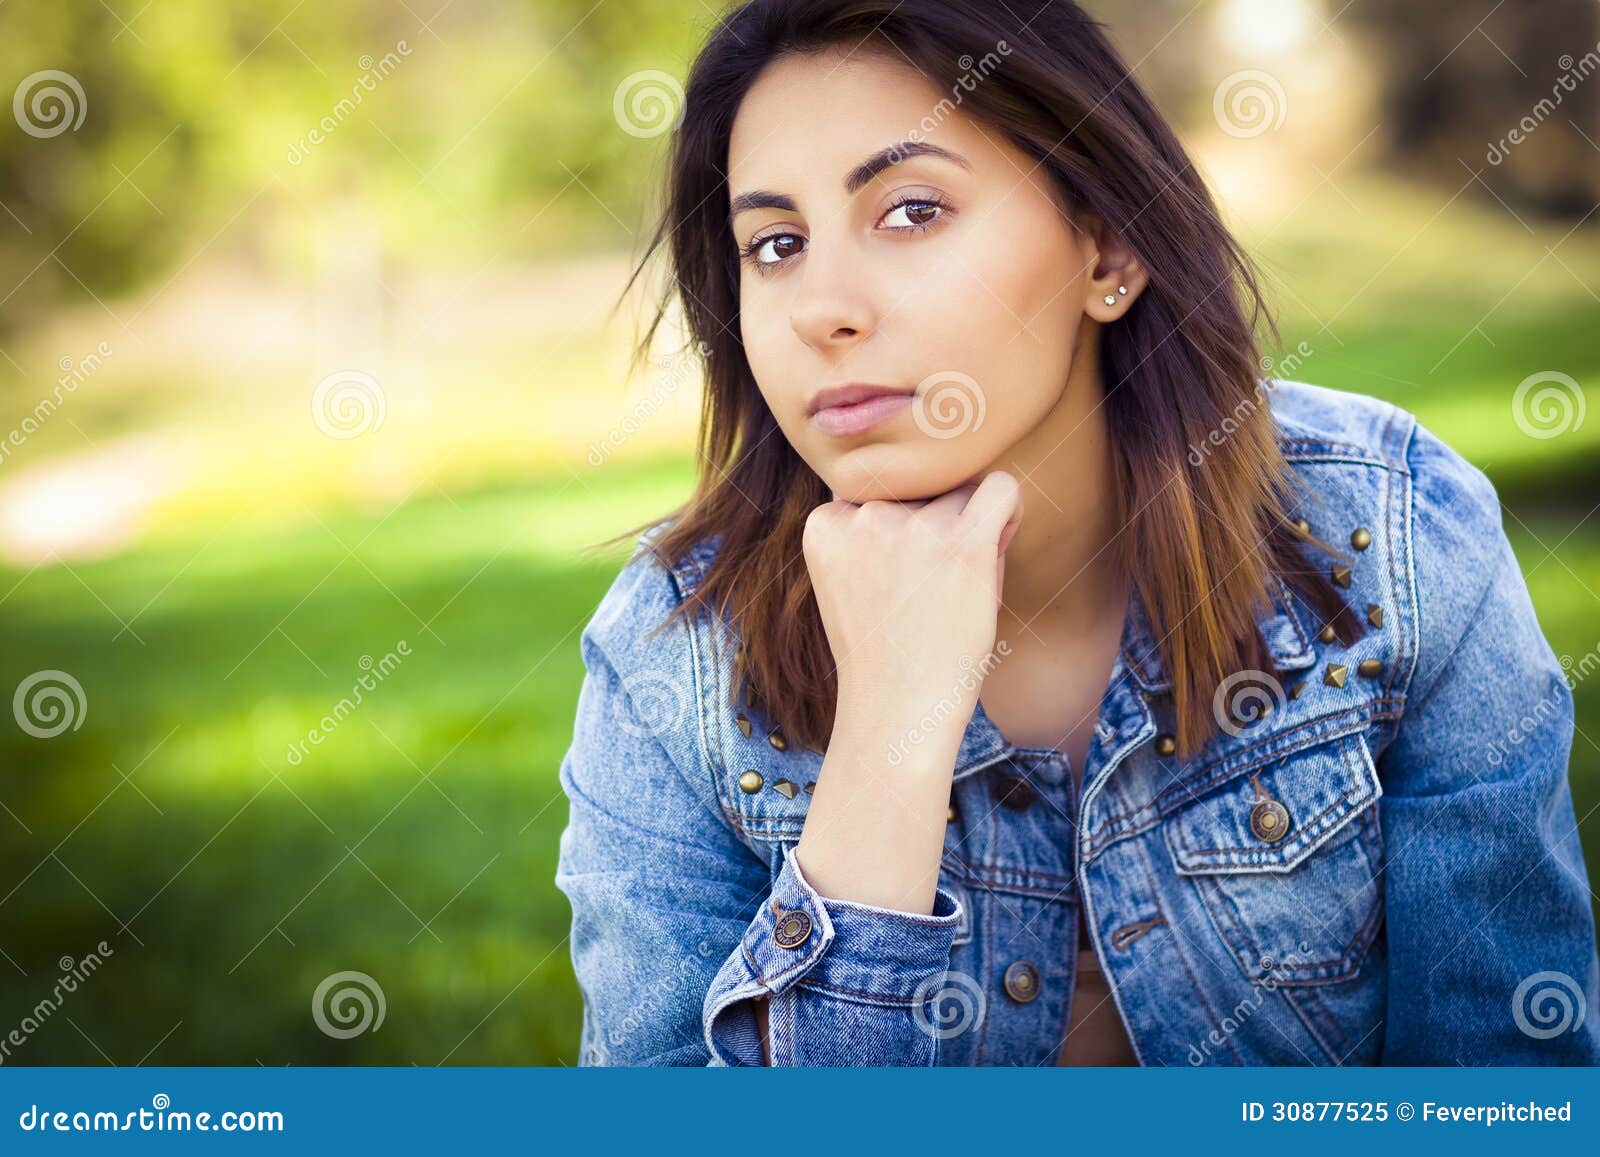 Serious Mixed Race Young Woman Stock Image - Image of people, mixed ...